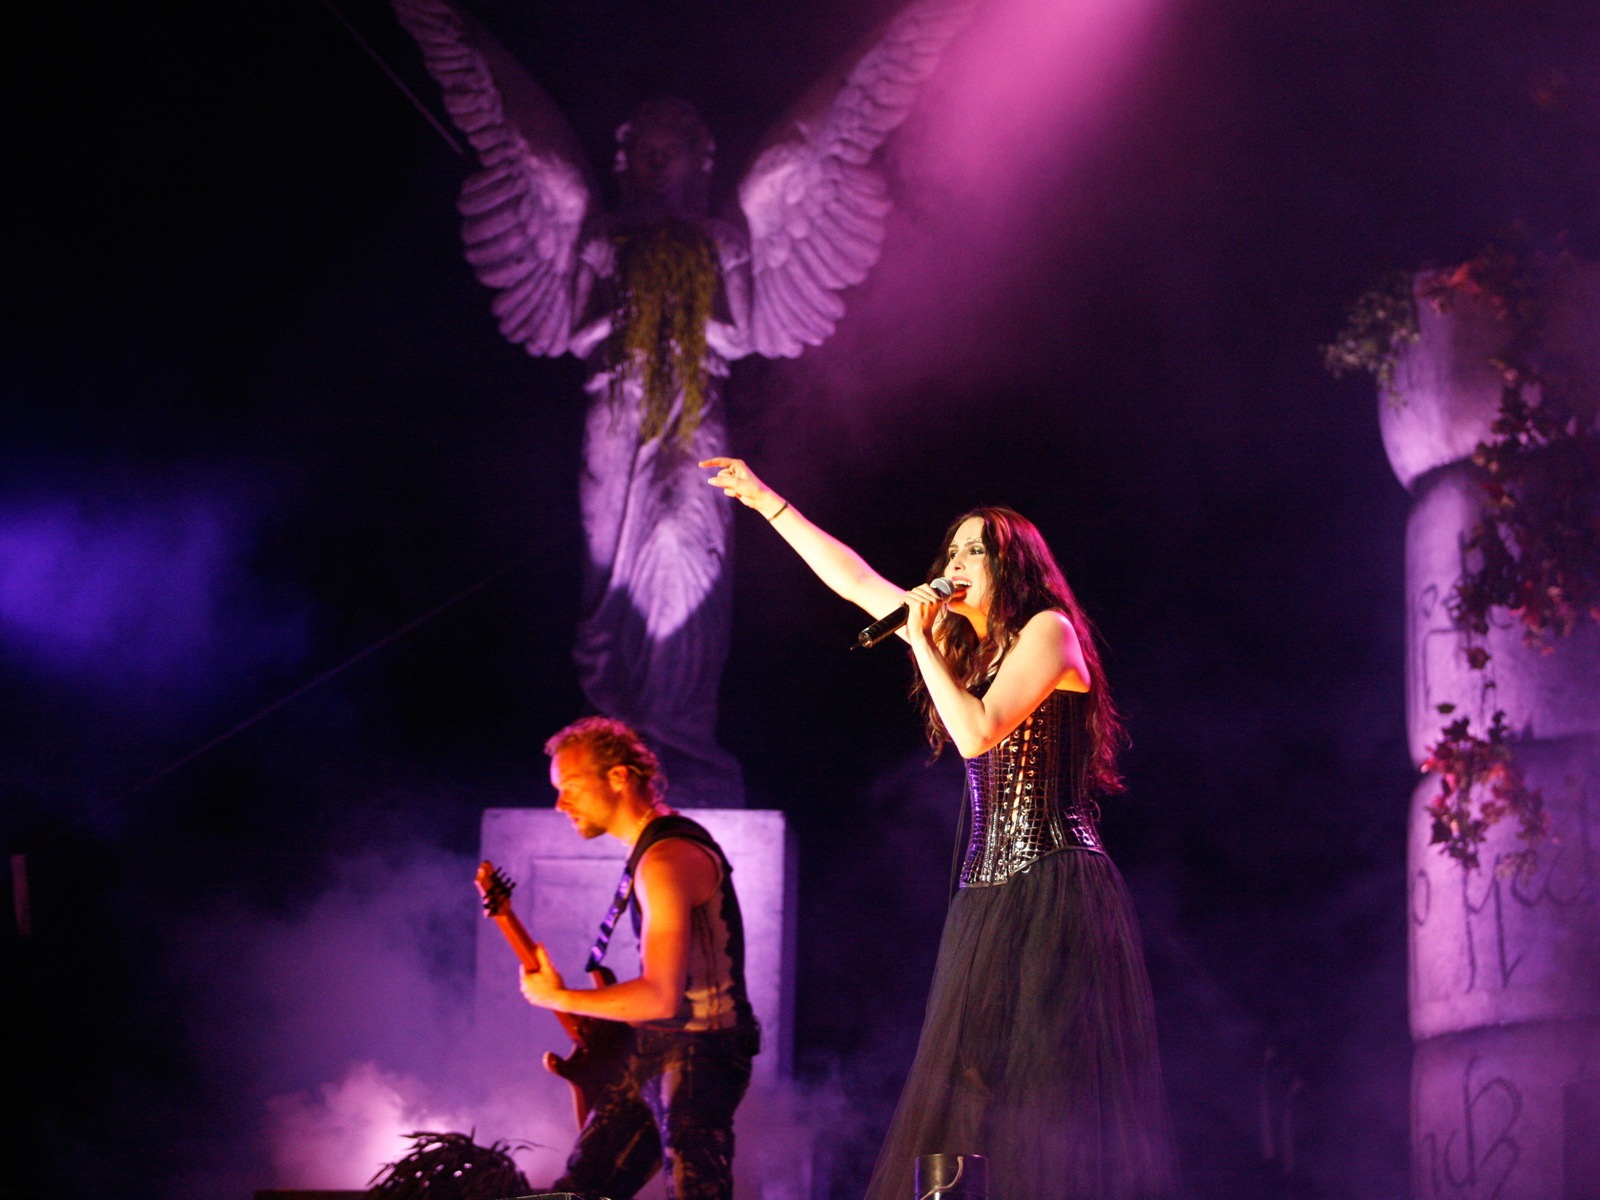 Sharon den Adel #014 - 1600x1200 Wallpapers Pictures Photos Images